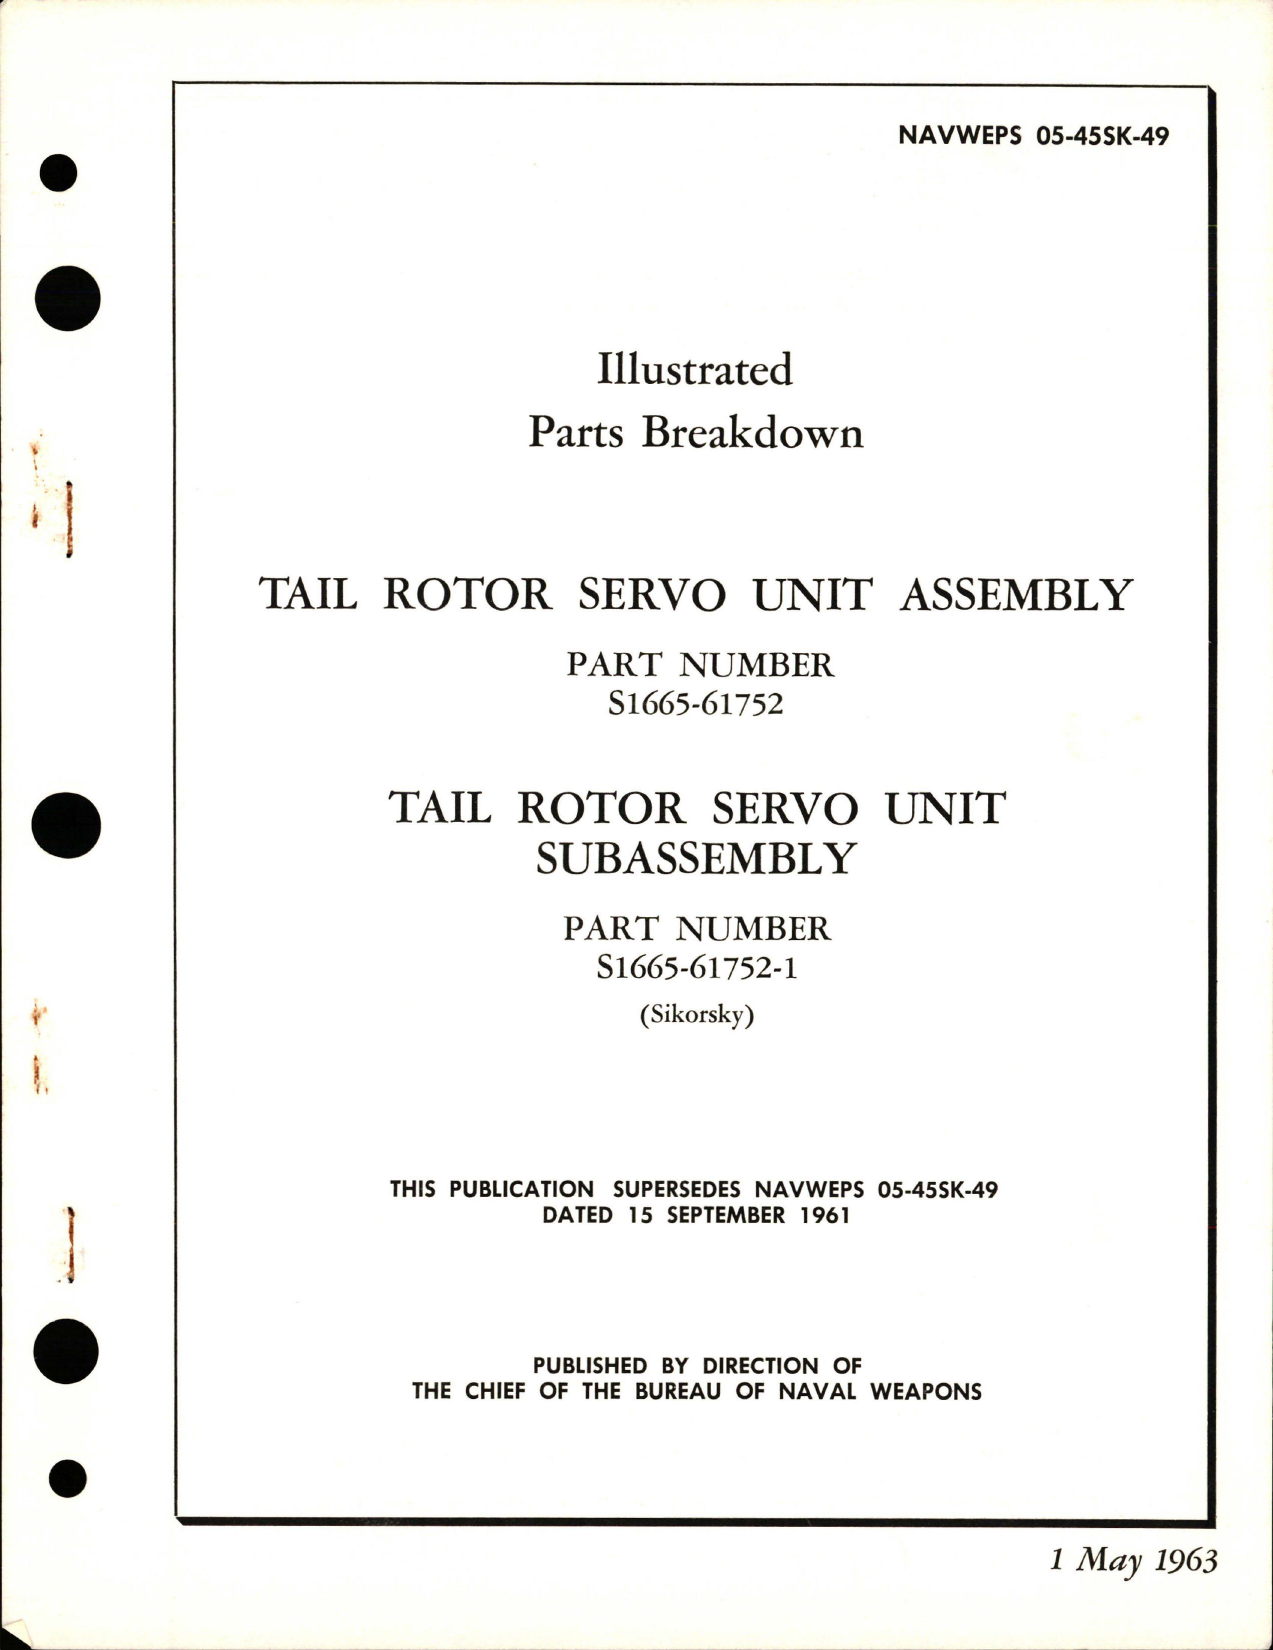 Sample page 1 from AirCorps Library document: Illustrated Parts Breakdown for Tail Rotor Servo Unit Assembly - Part S1665-61752 and Tail Rotor Servo Unit Subassembly - Part S1665-61752-1